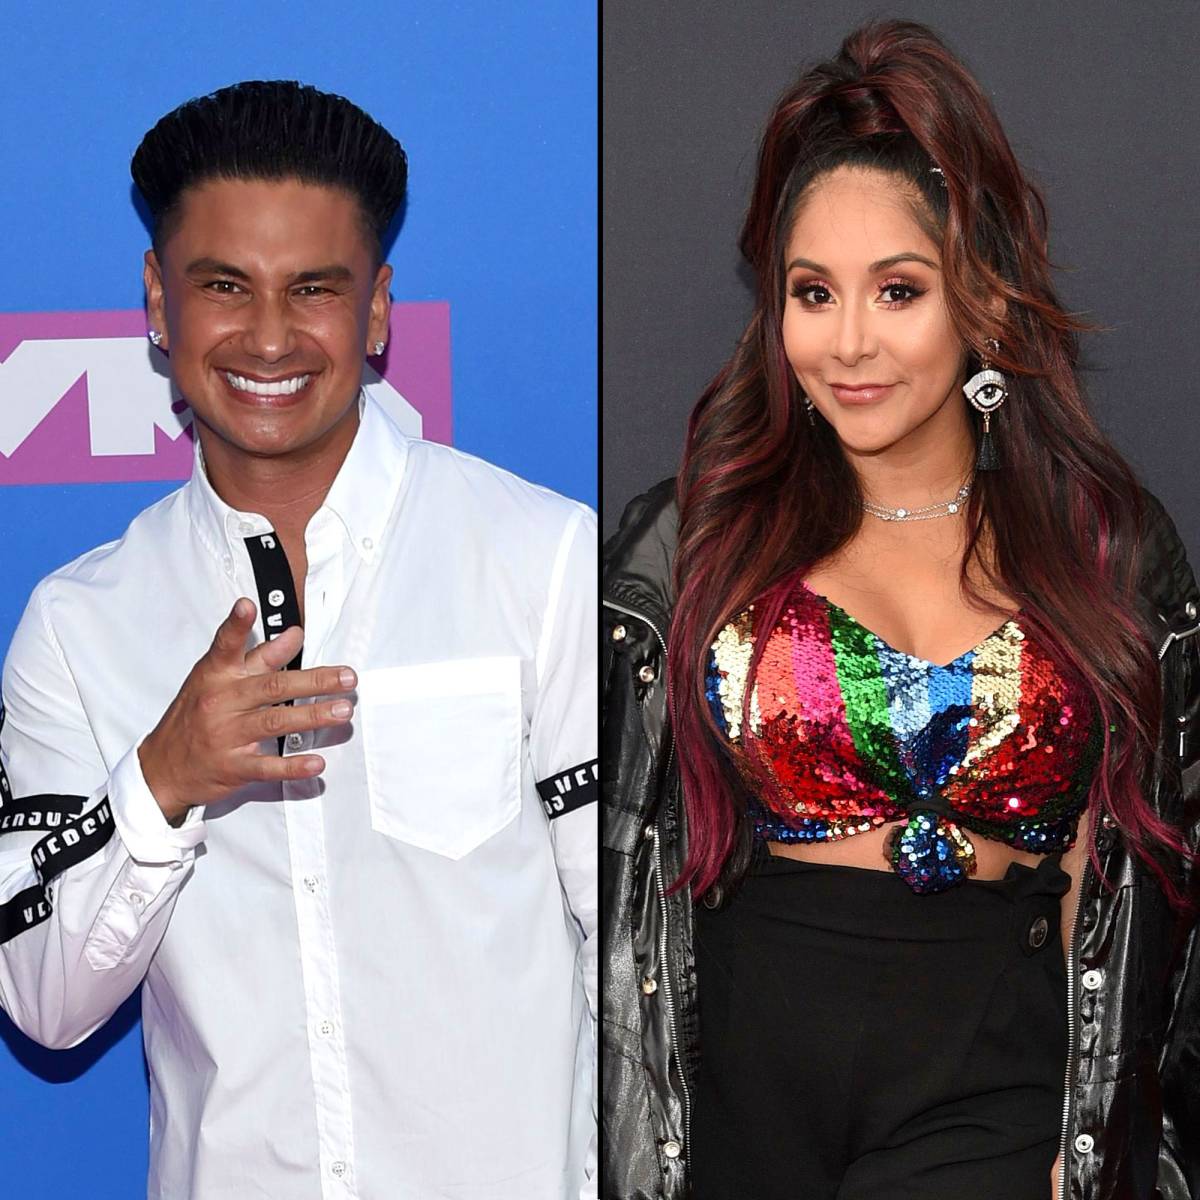 Nicole 'Snooki' Polizzi Has 'Moved On' From 'Jersey Shore